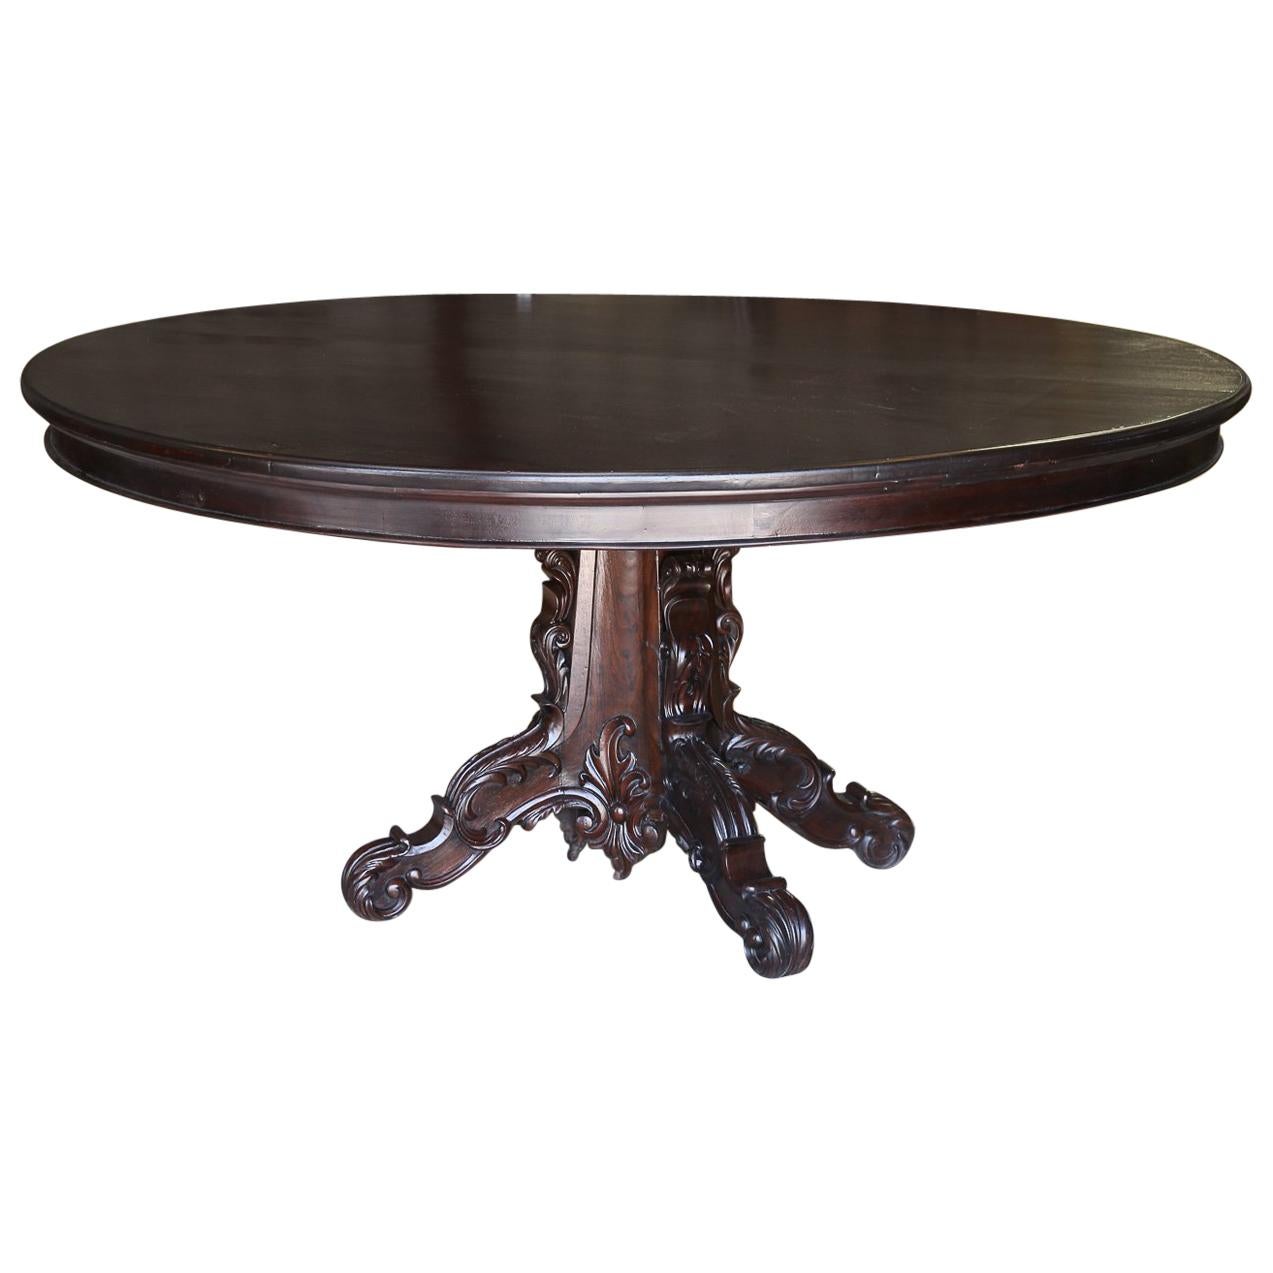 19th Century Superbly Handcrafted Solid Mahogany Round Governor's Dinning Table For Sale